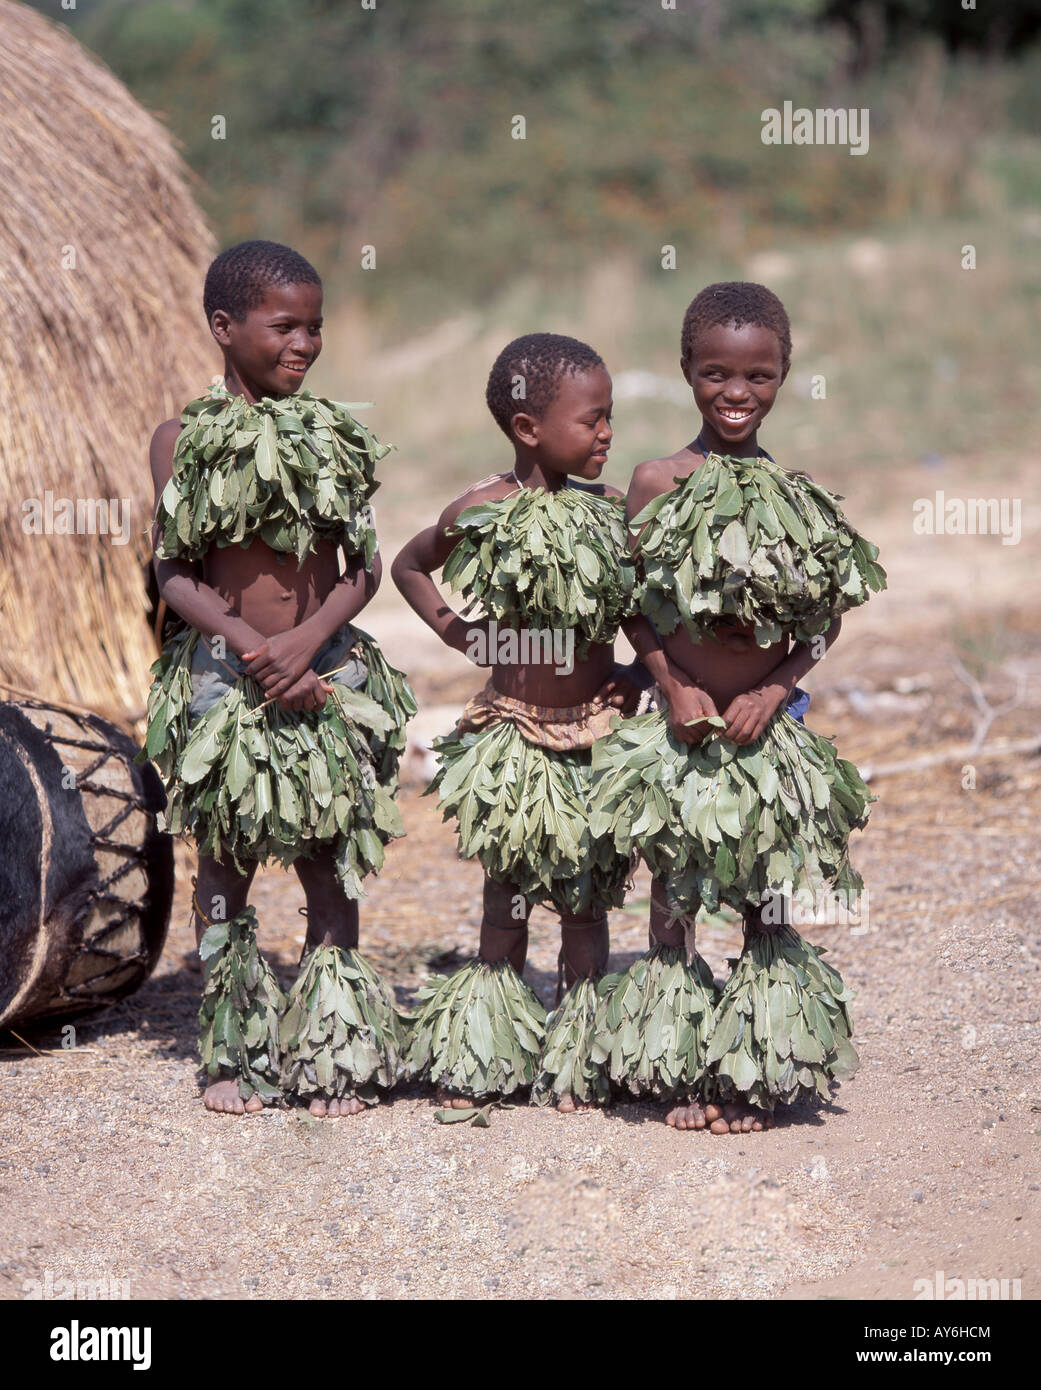 Young boy child dancers in local village, Eswatini (Swaziland) Stock Photo